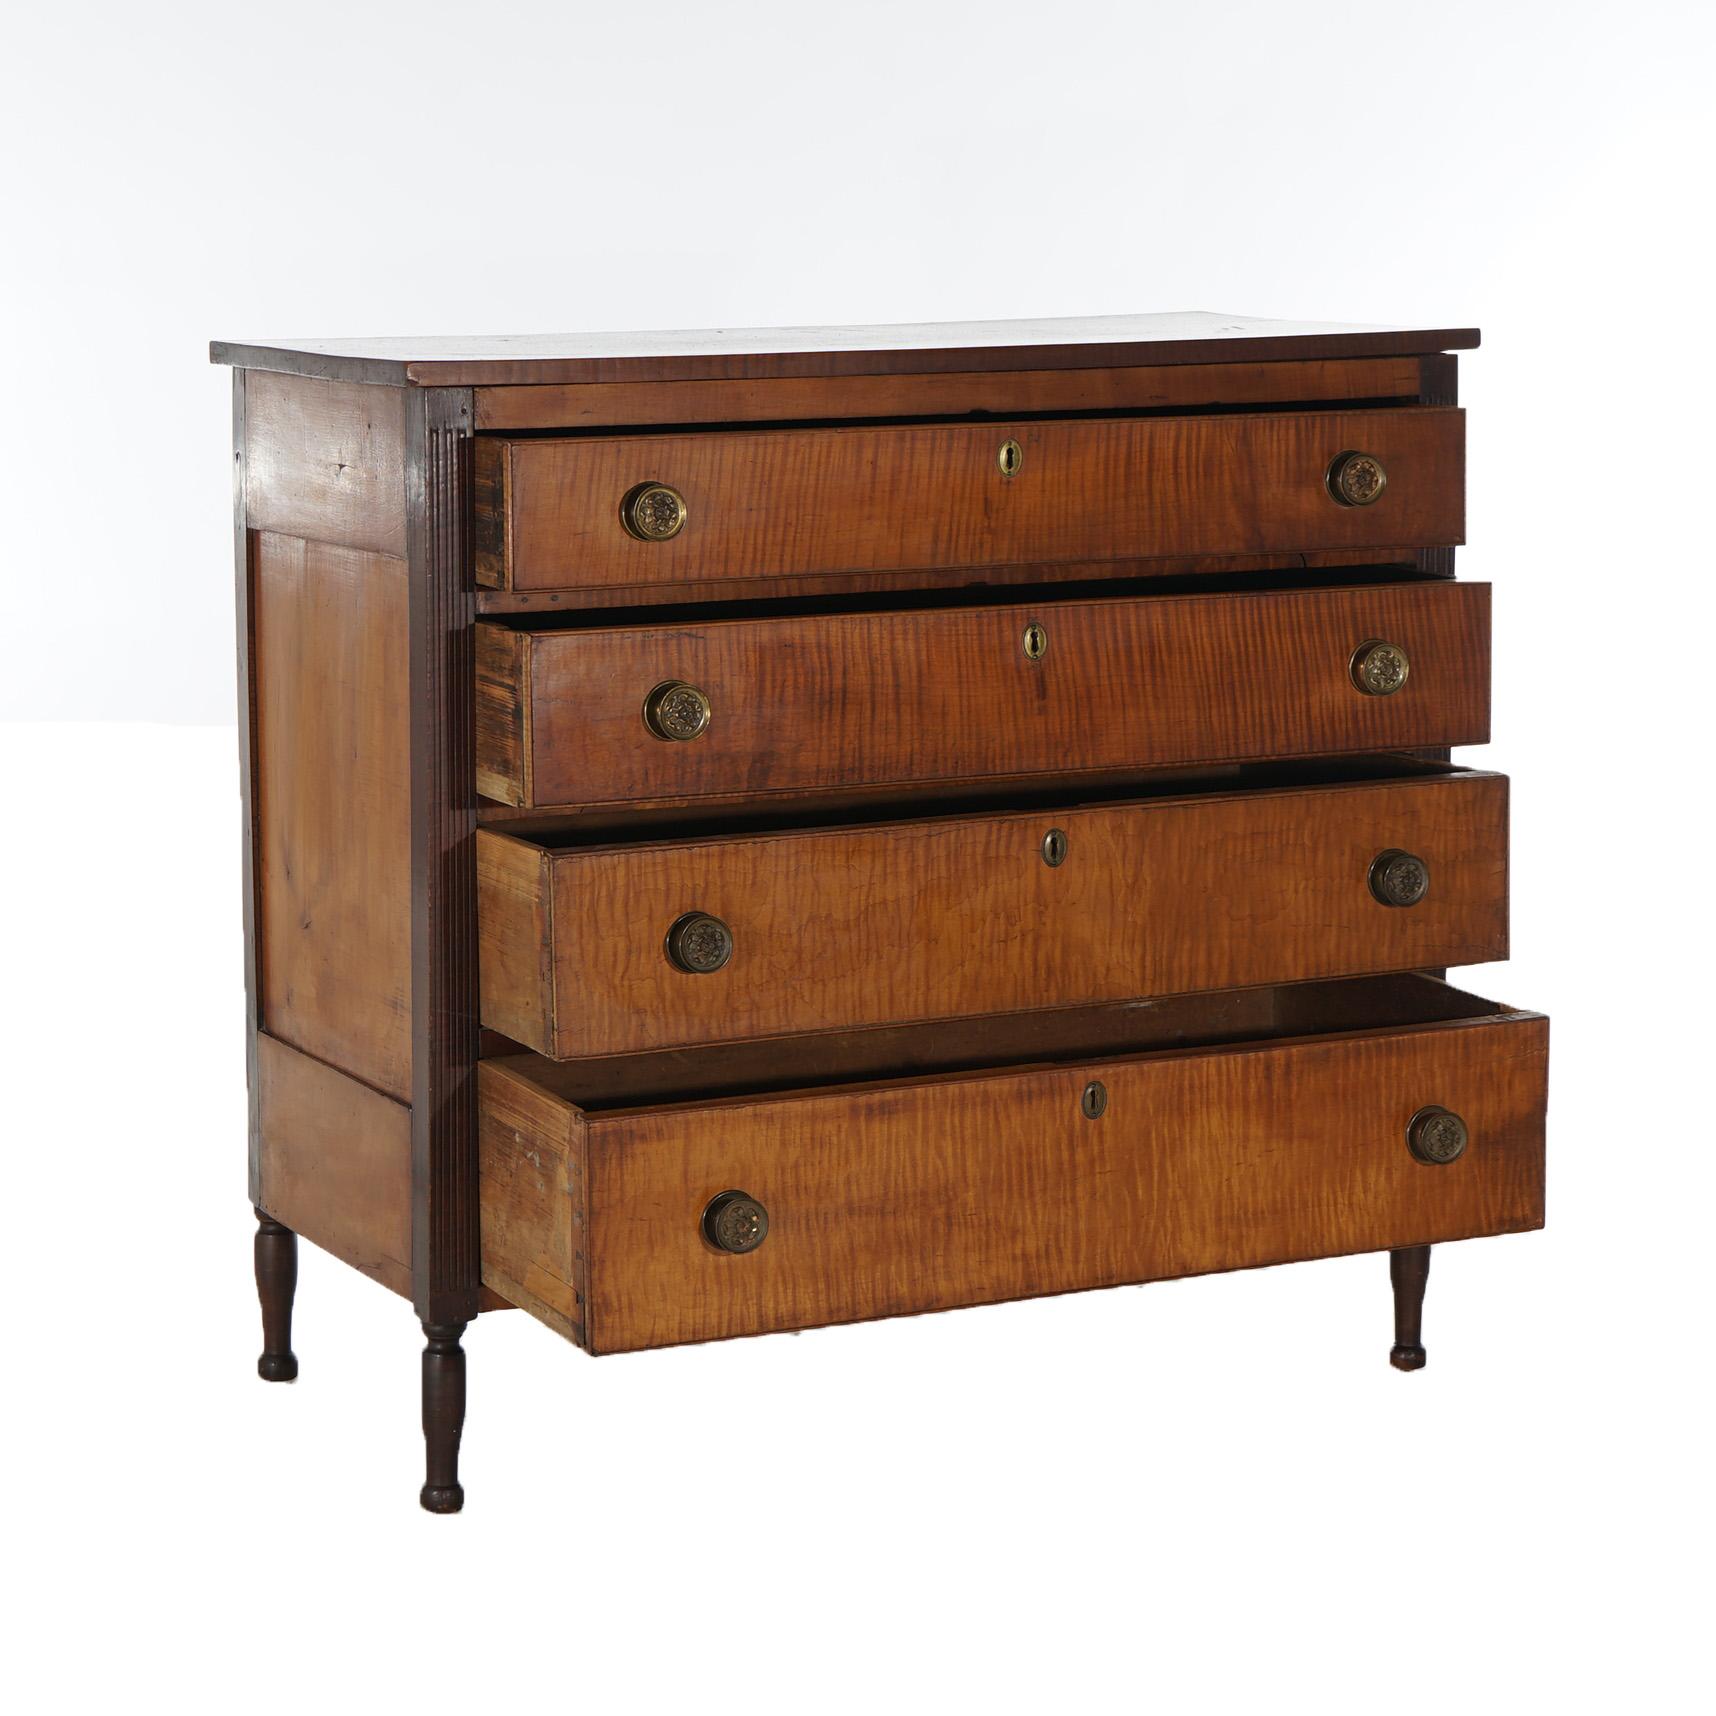 An antique Sheridan chest of drawers offers tiger maple construction with four graduated long drawers flanked by reeded columns, raised on turned legs, c1870

Measures - 39